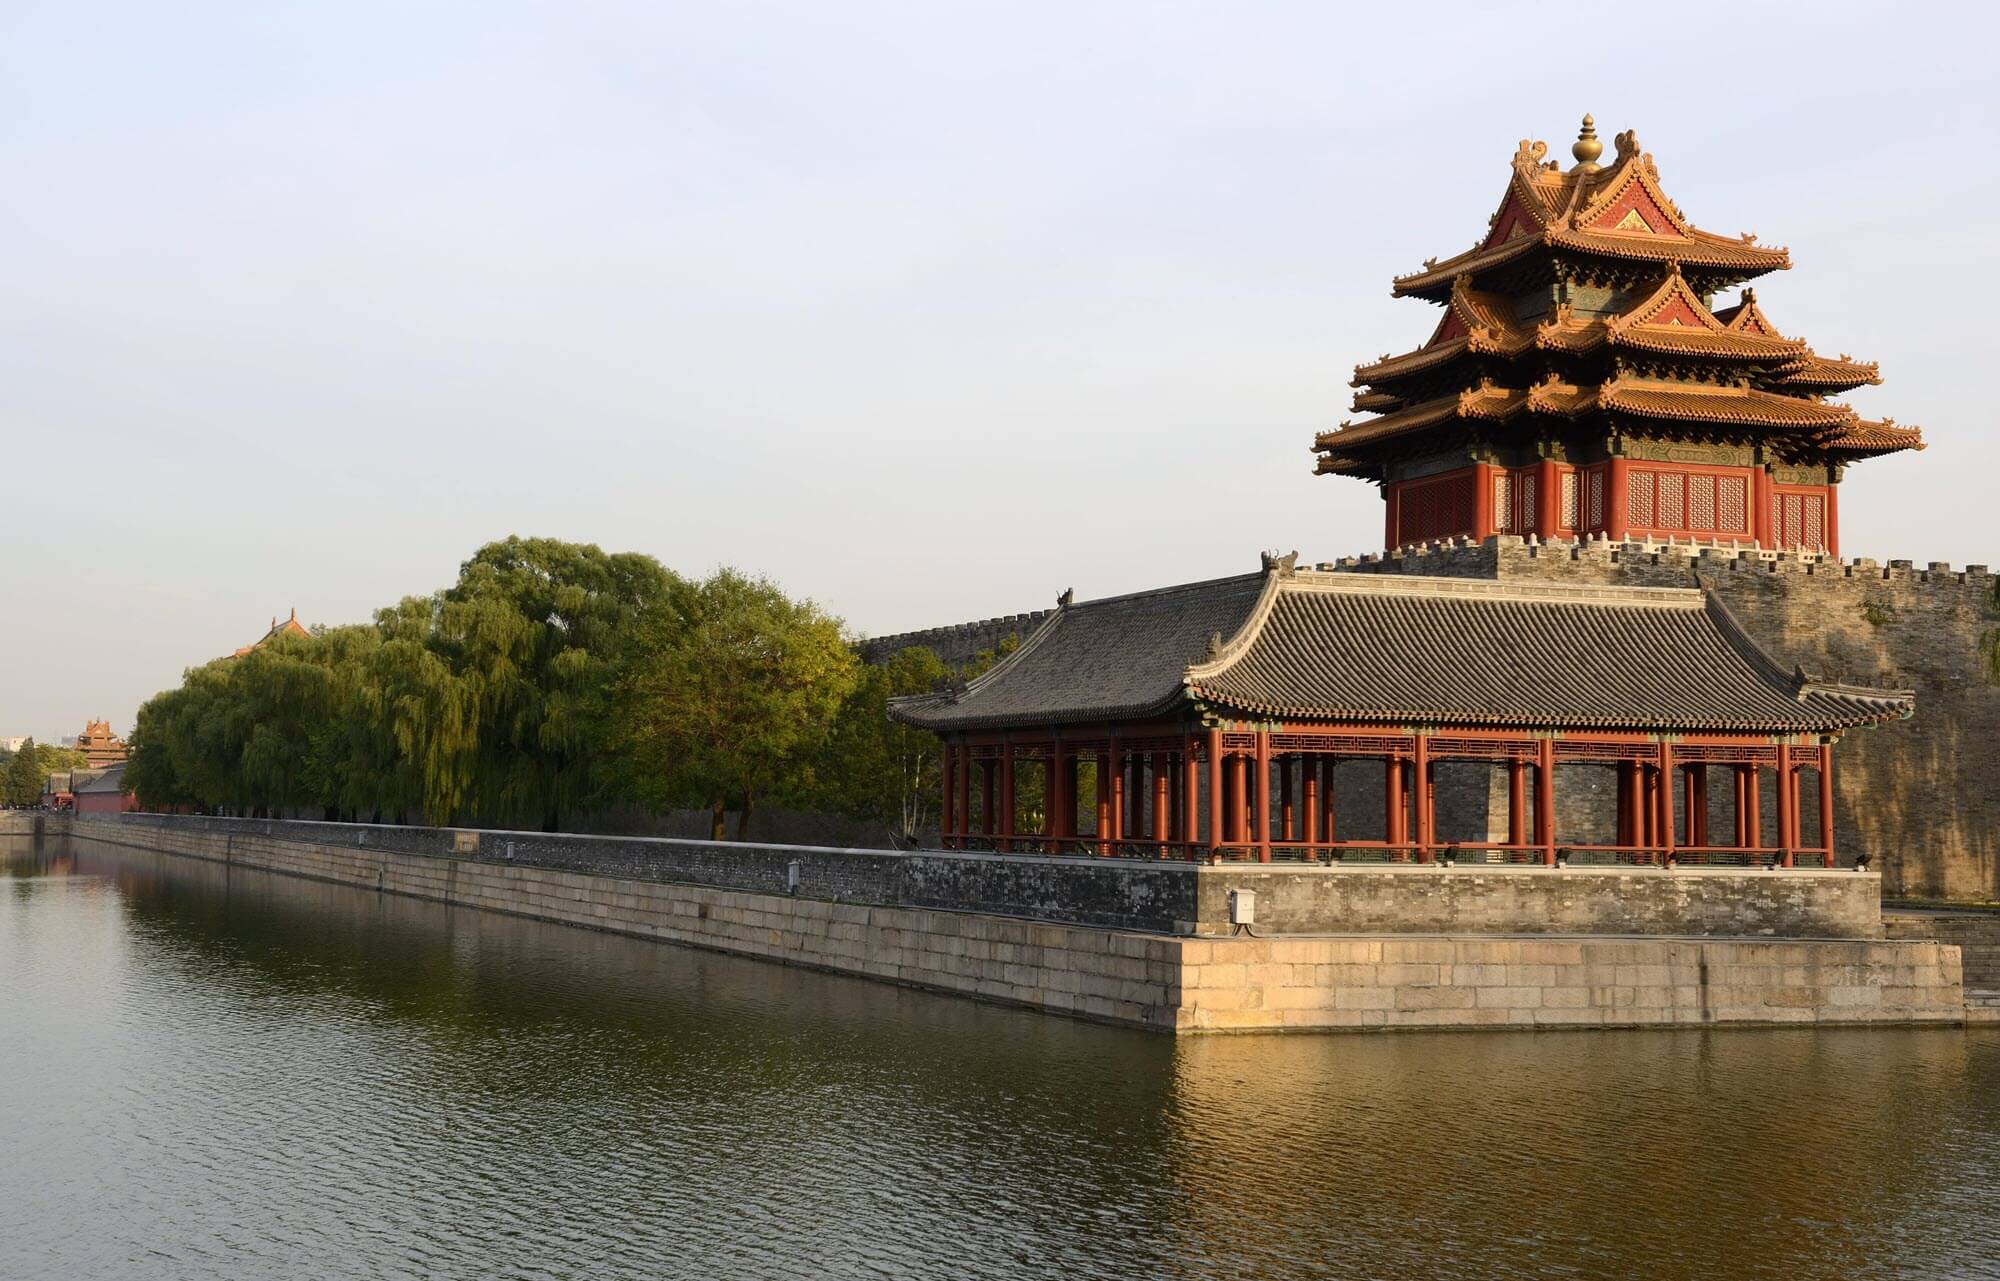 The Forbidden City, located in the centre of Beijing